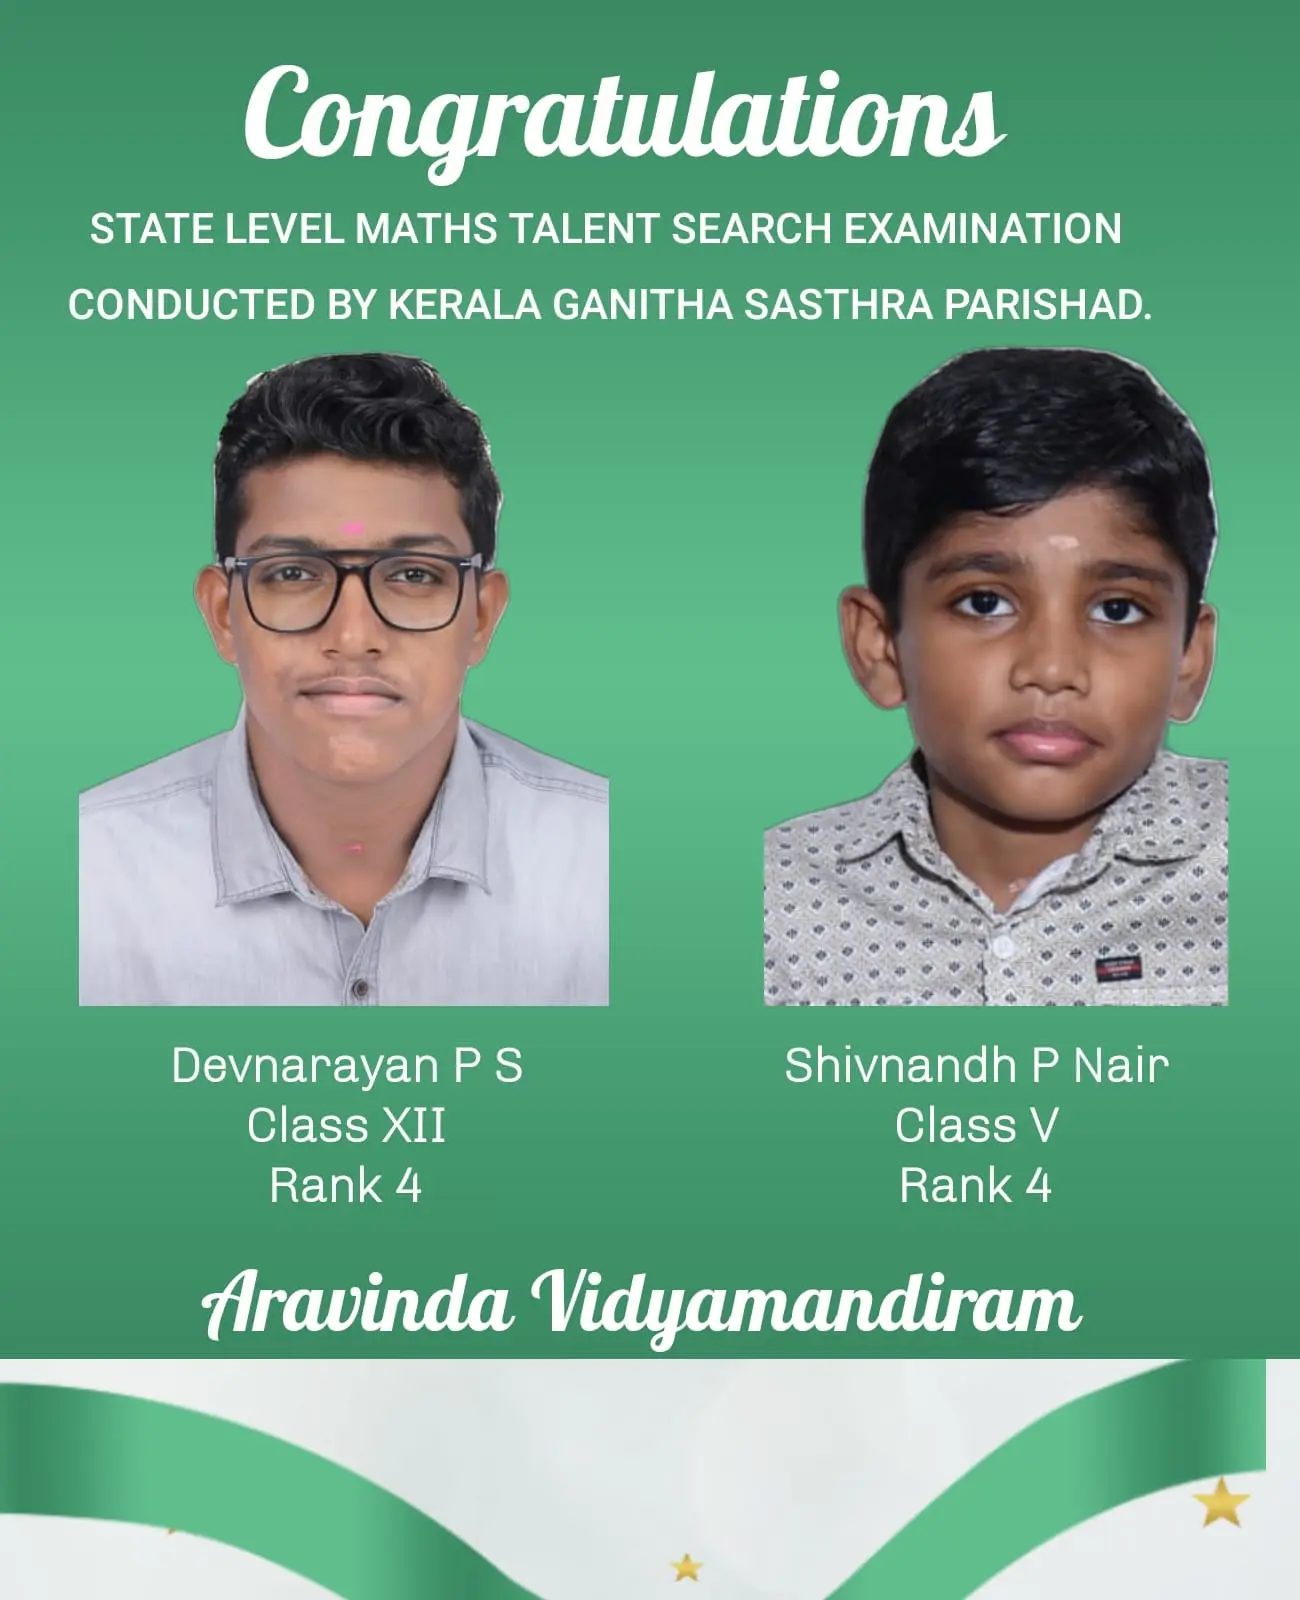 Hearty Congratulations to Our Students Who achieve 4th Rank in State Level Maths Talent Search Examination